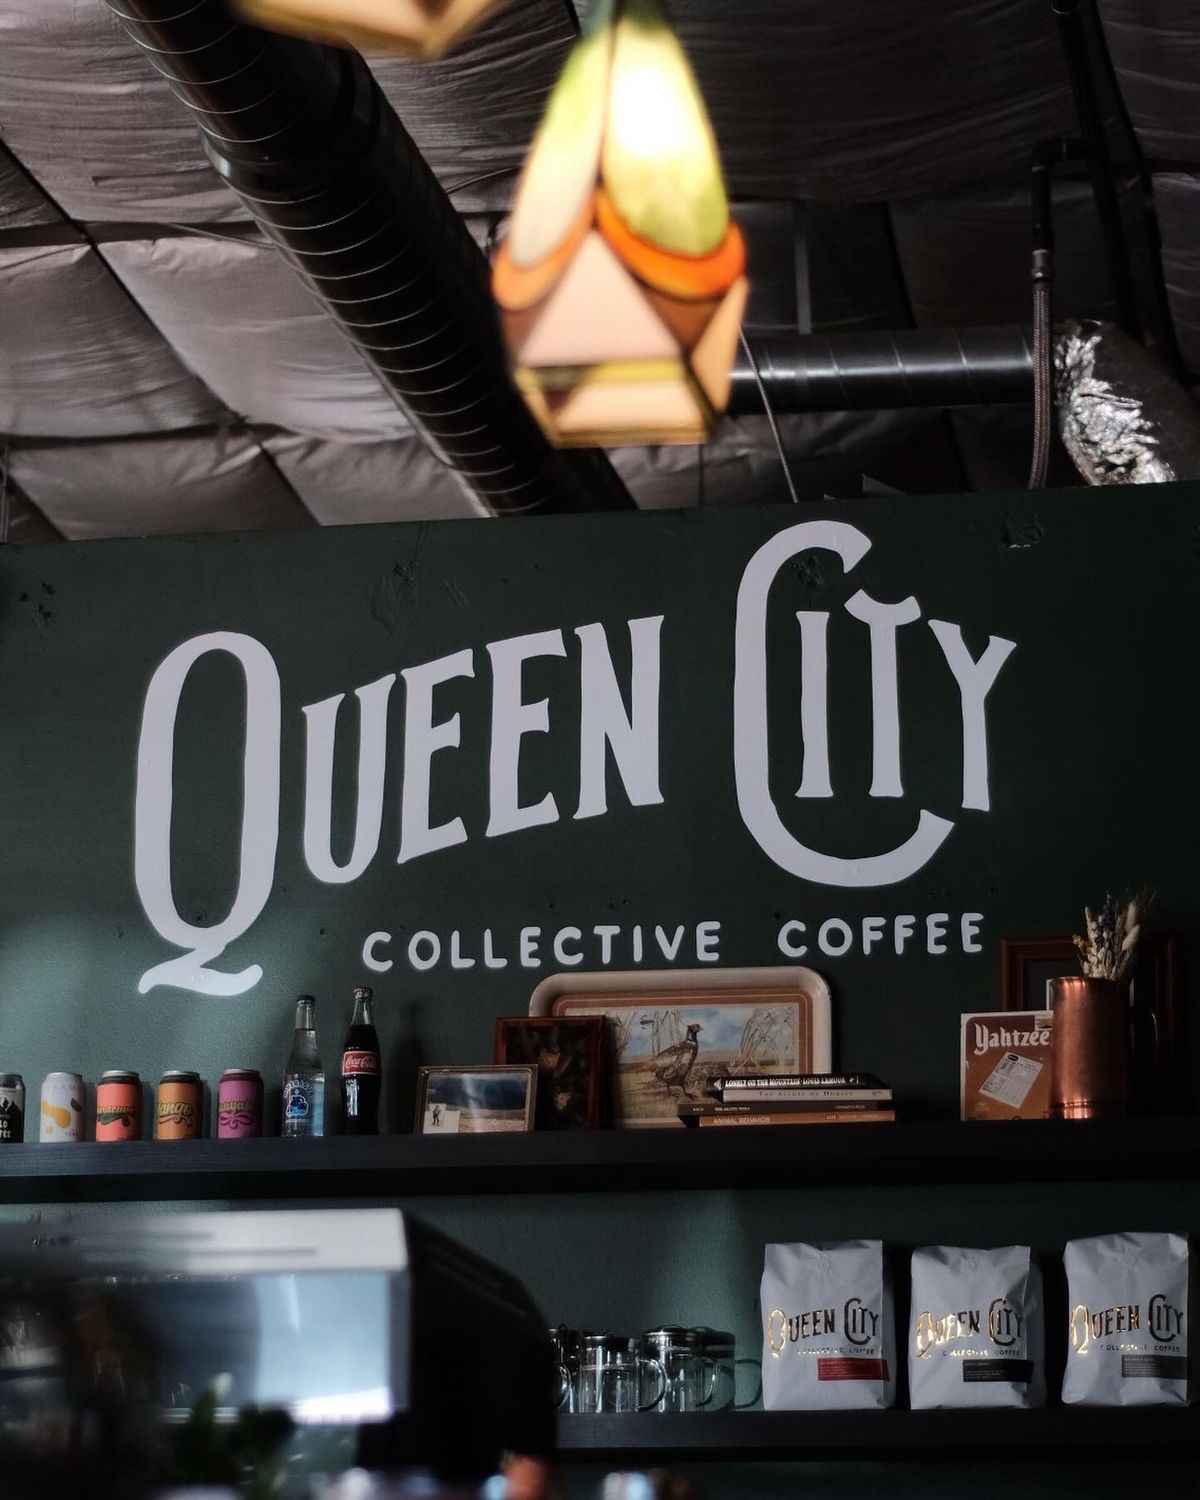 bRUNCH run @ Town Hall with Queen City Collective Coffee